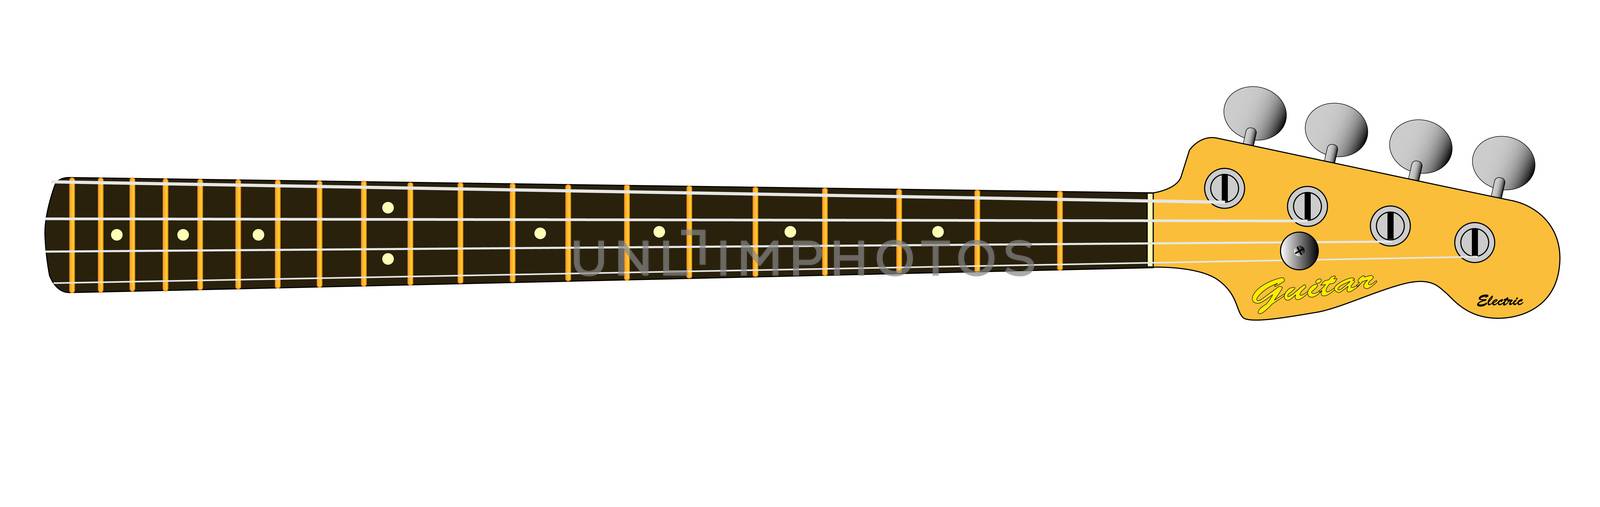 A generic bass guitar neck isolated over a white background.